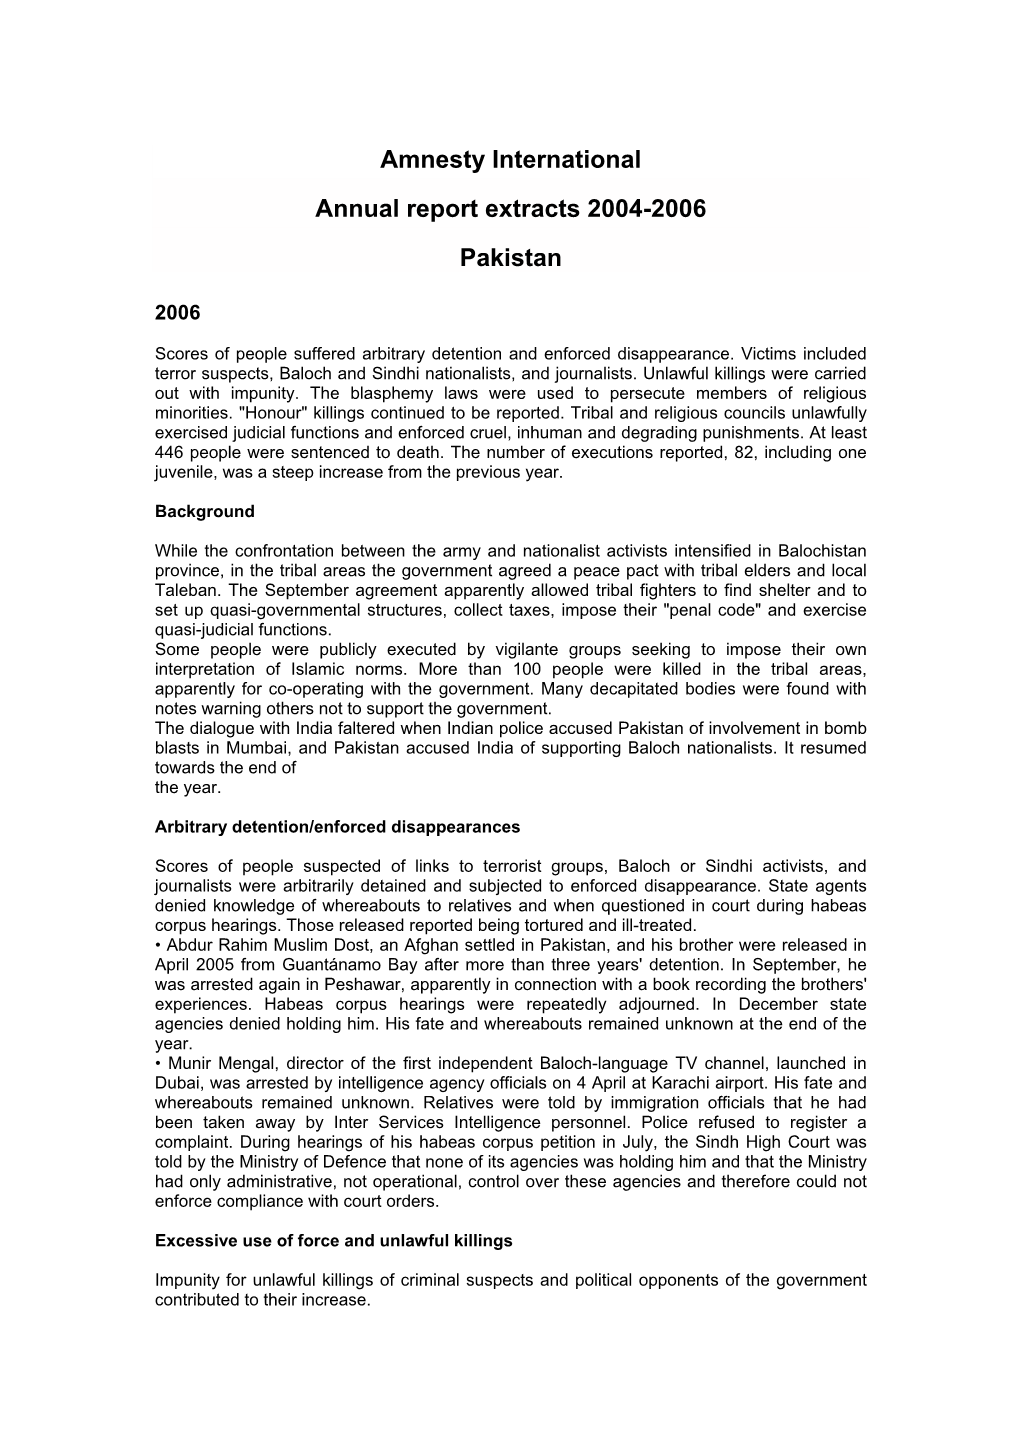 Amnesty International Annual Report Extracts 2004-2006 Pakistan